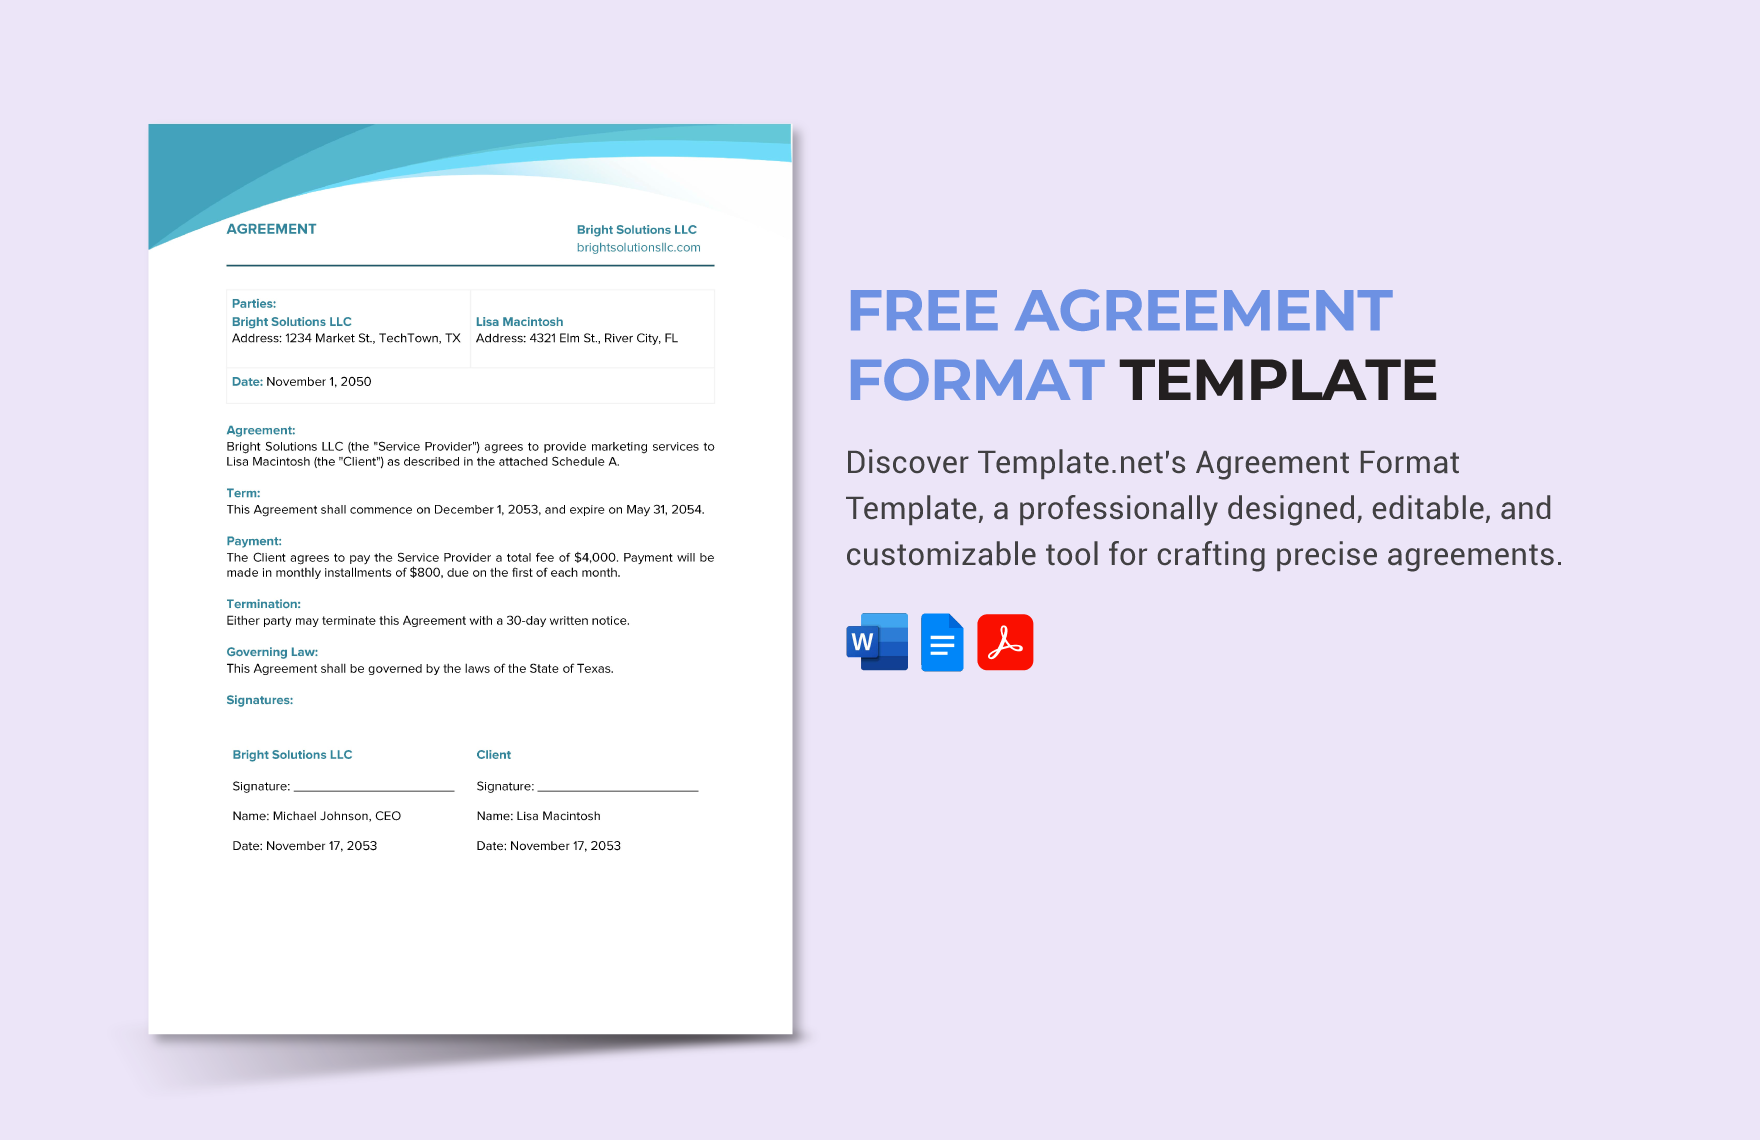 Agreement Format Template